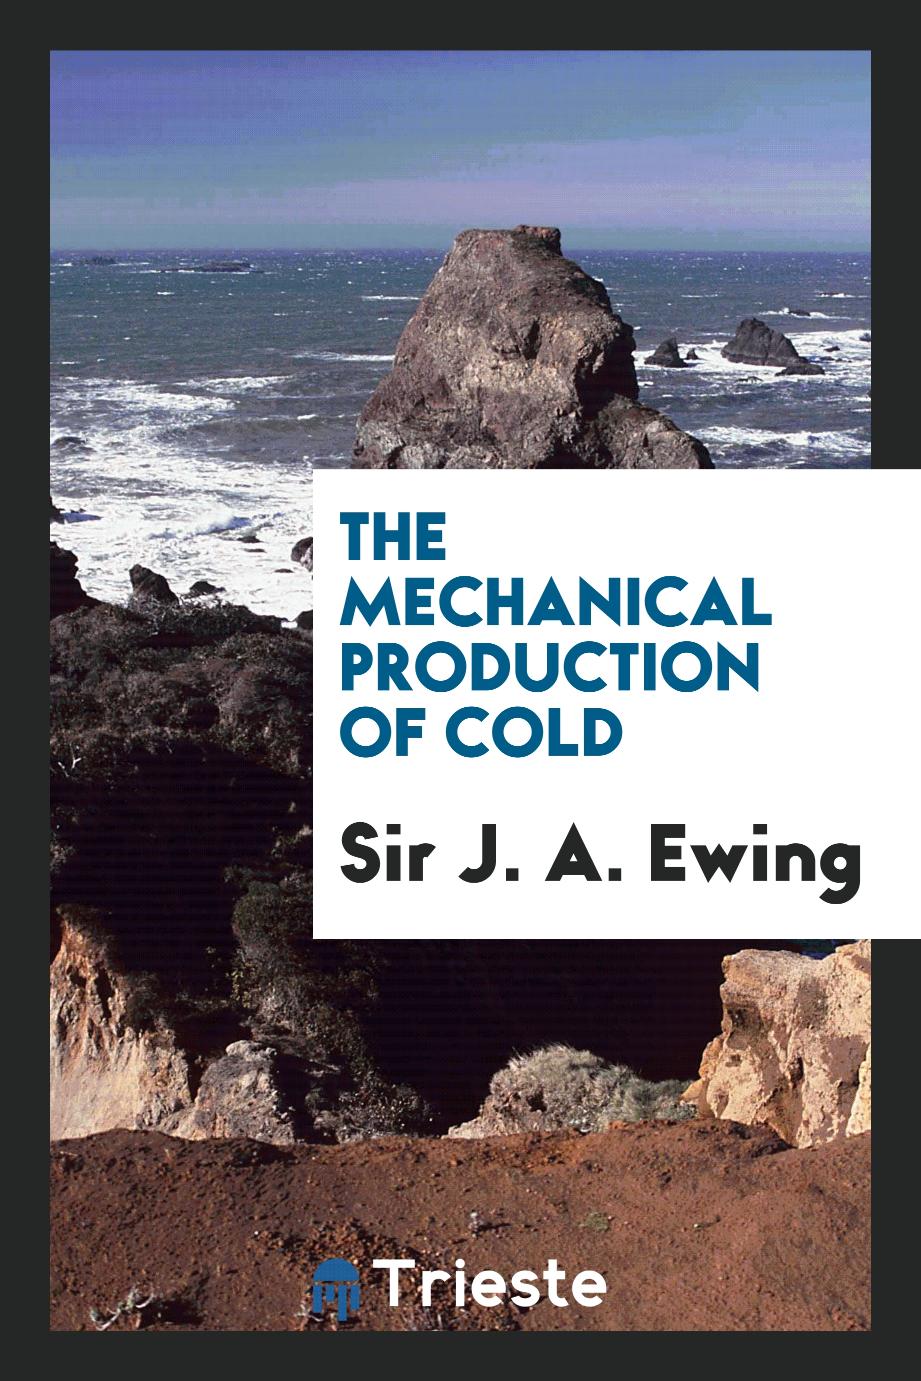 The mechanical production of cold